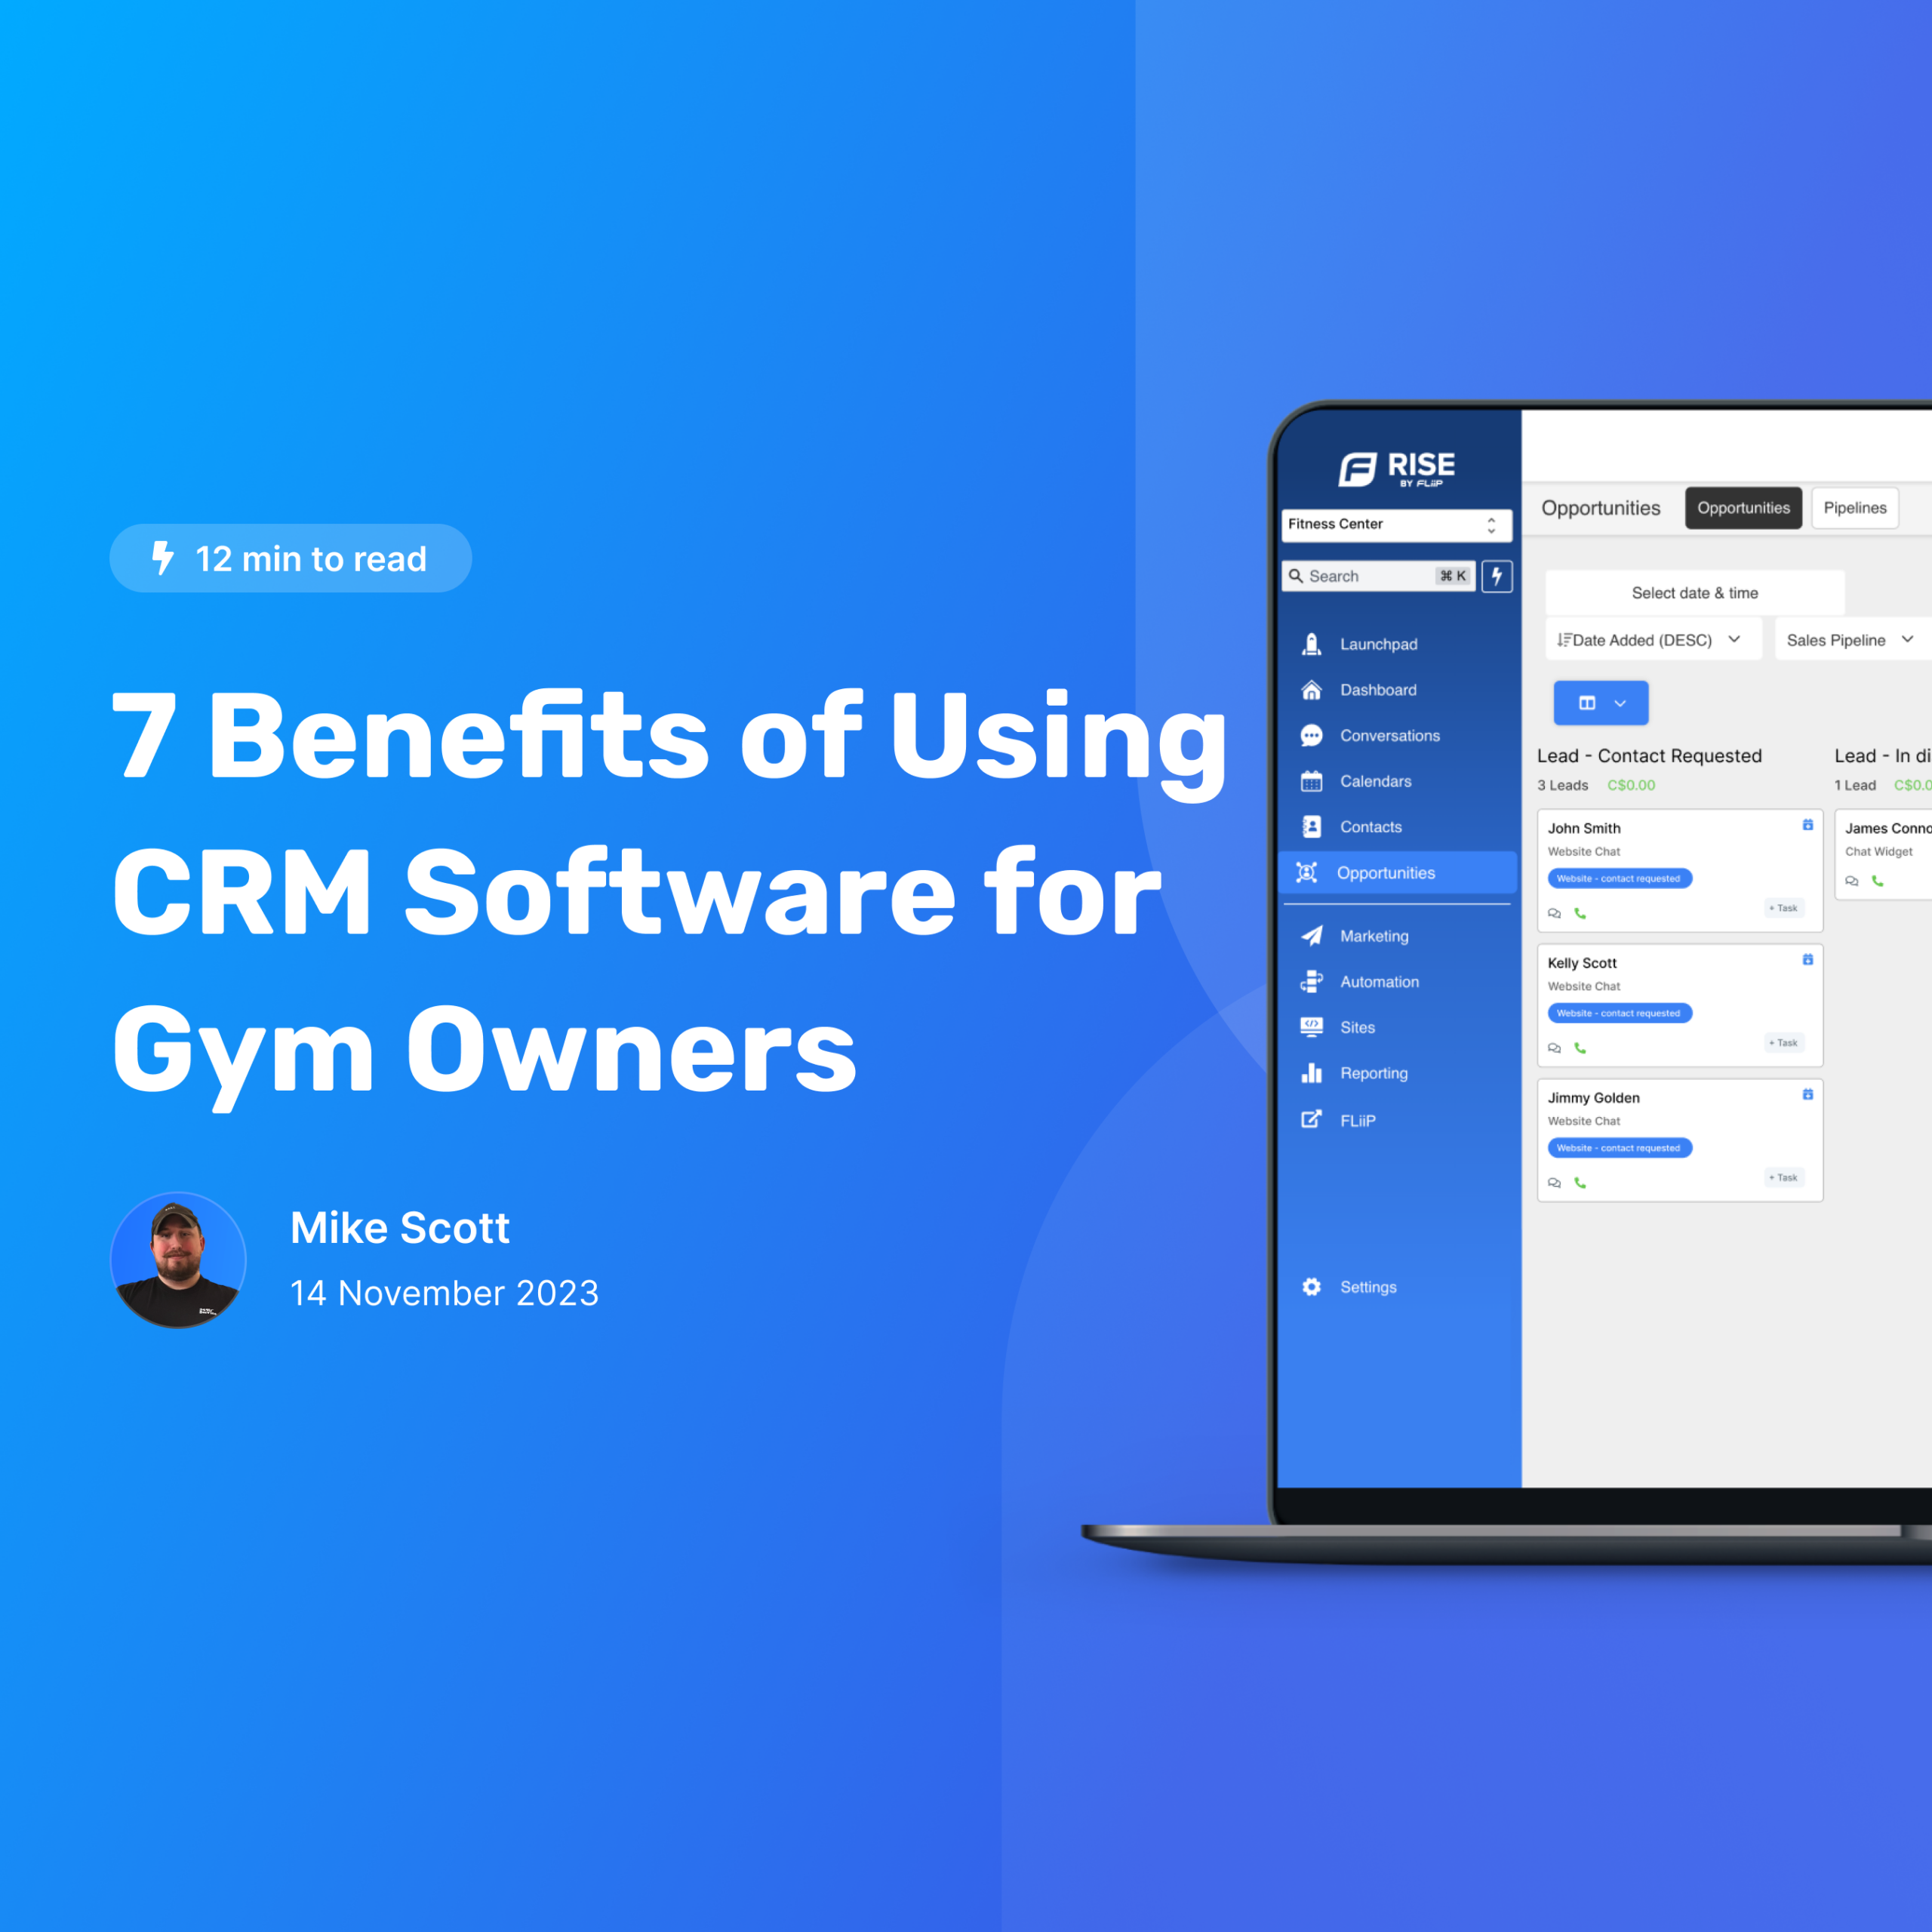 7 Benefits of Using CRM Software for Gym Owners